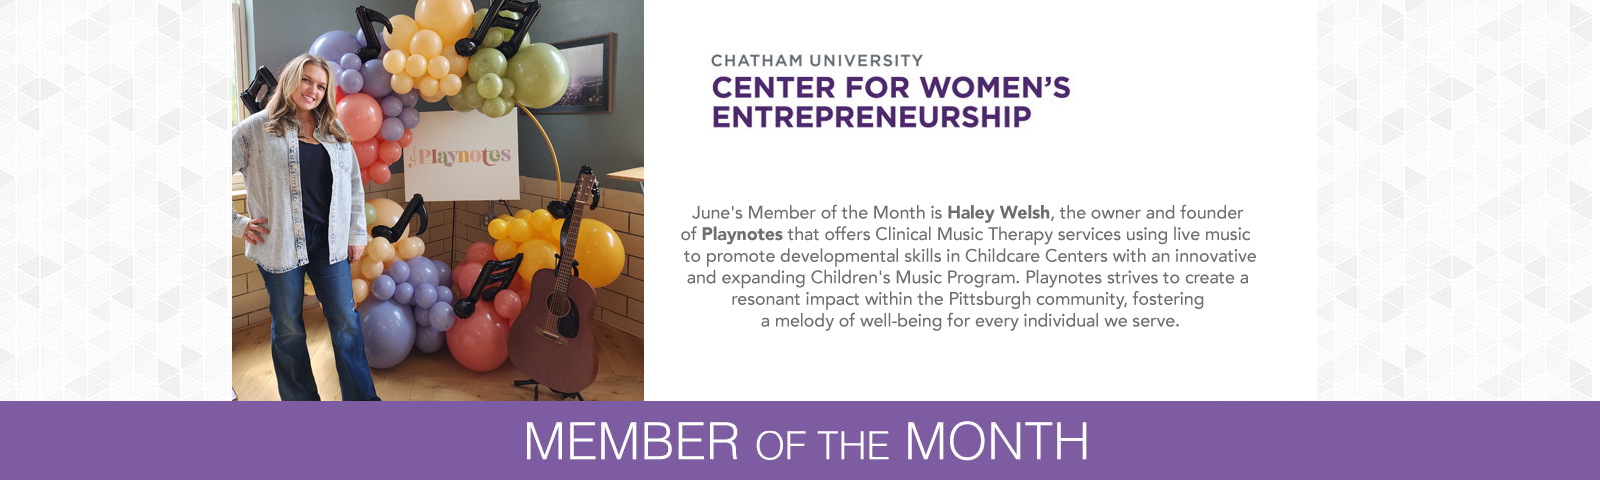 June's Member of the Month is Haley Welsh, the owner and founder of Playnotes that offers Clinical Music Therapy services.